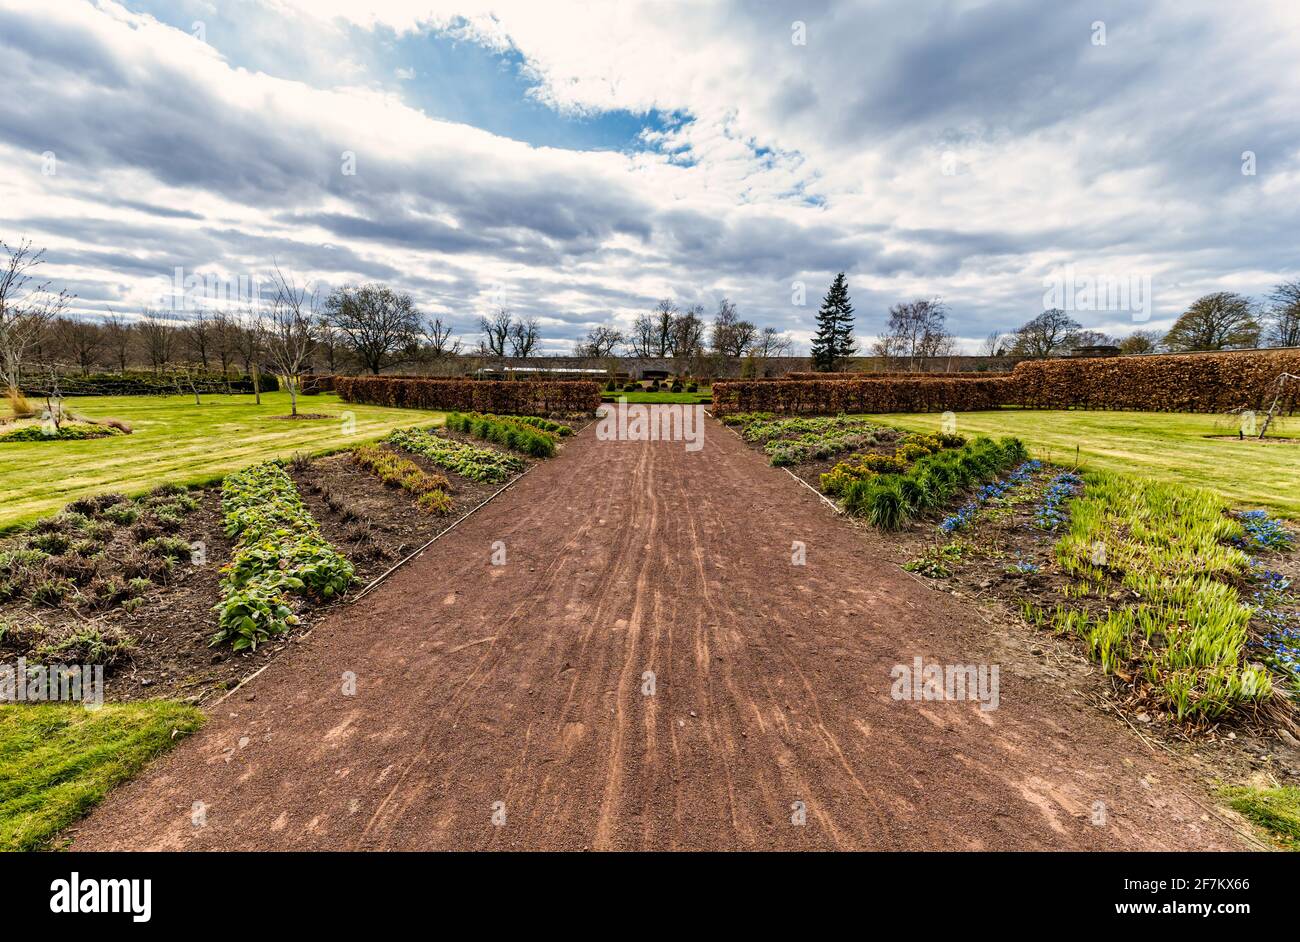 A long avenue footpath with formal flowerbeds, Amisfield walled garden, East Lothian, Scotland, UK Stock Photo